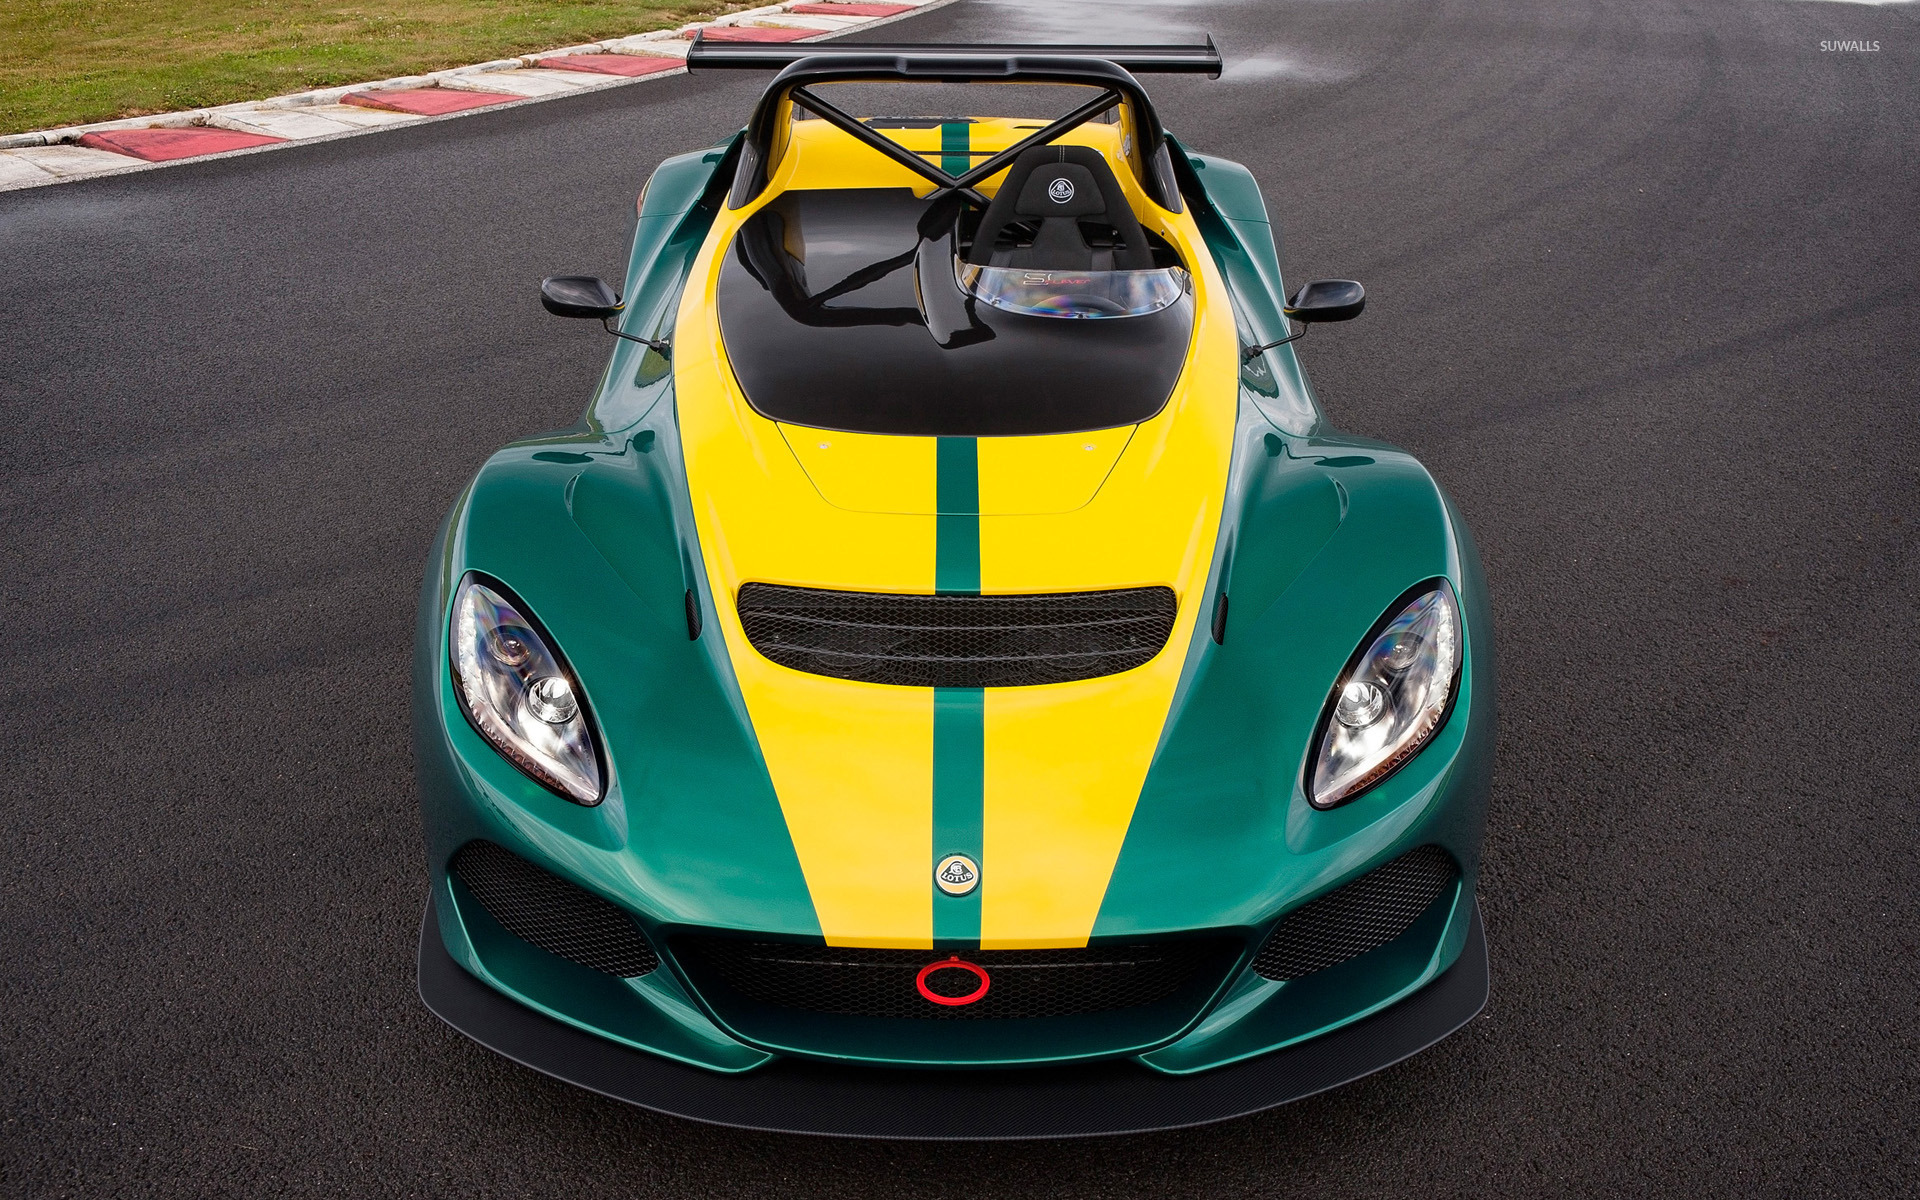 2016-lotus-3-eleven-front-view-50068-1920x1200.jpg